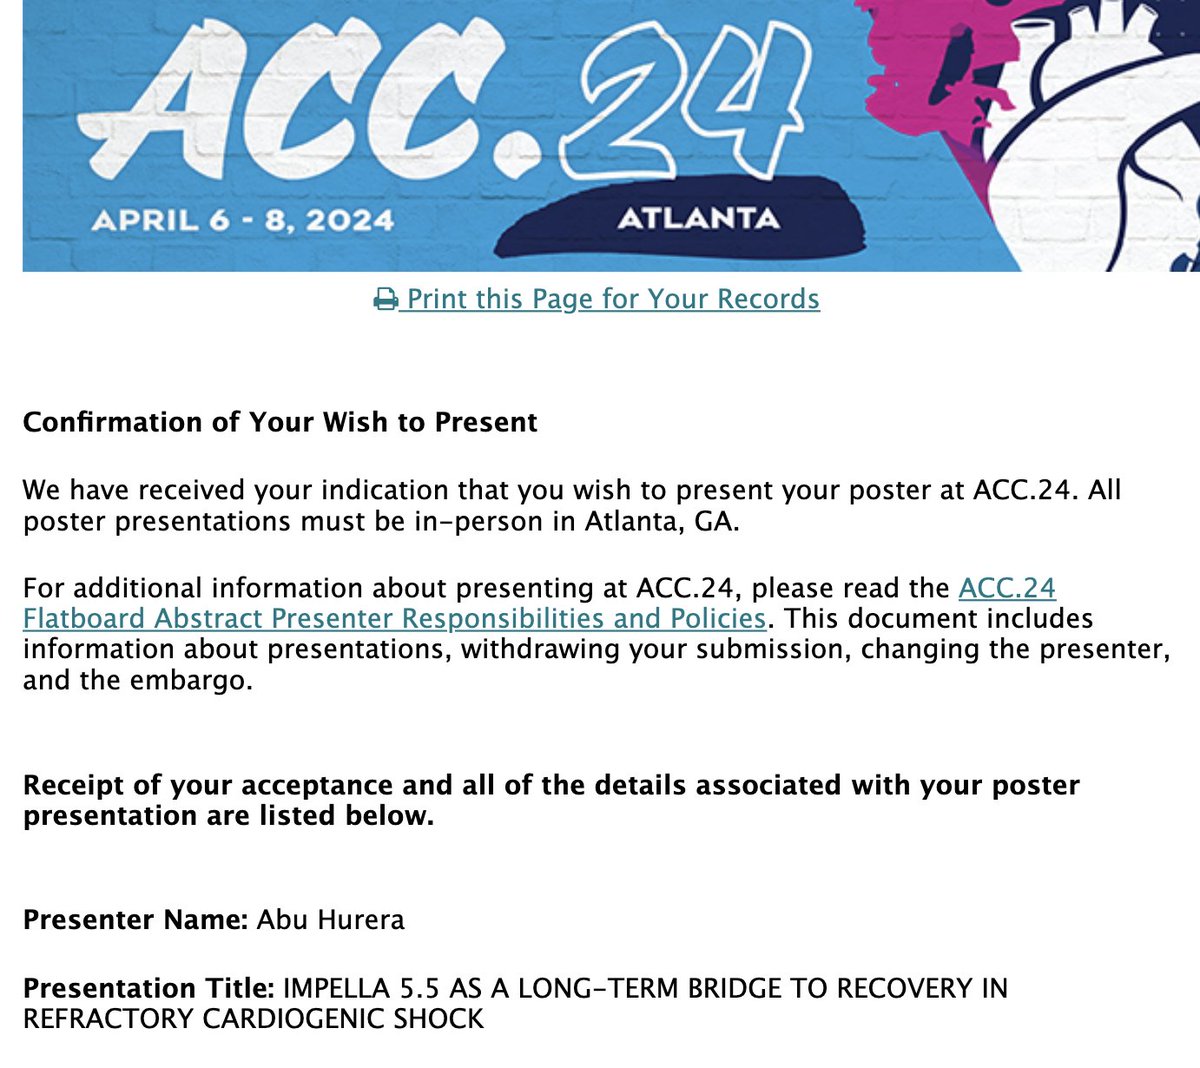 Pleased to share the news of my abstract submission! Excited to go to #ACC24 Thank you Dr.@GavHick for your mentorship! Grateful to all the co-authors. Looking forward to meeting everyone in Atlanta! #ACC24 #Atlanta